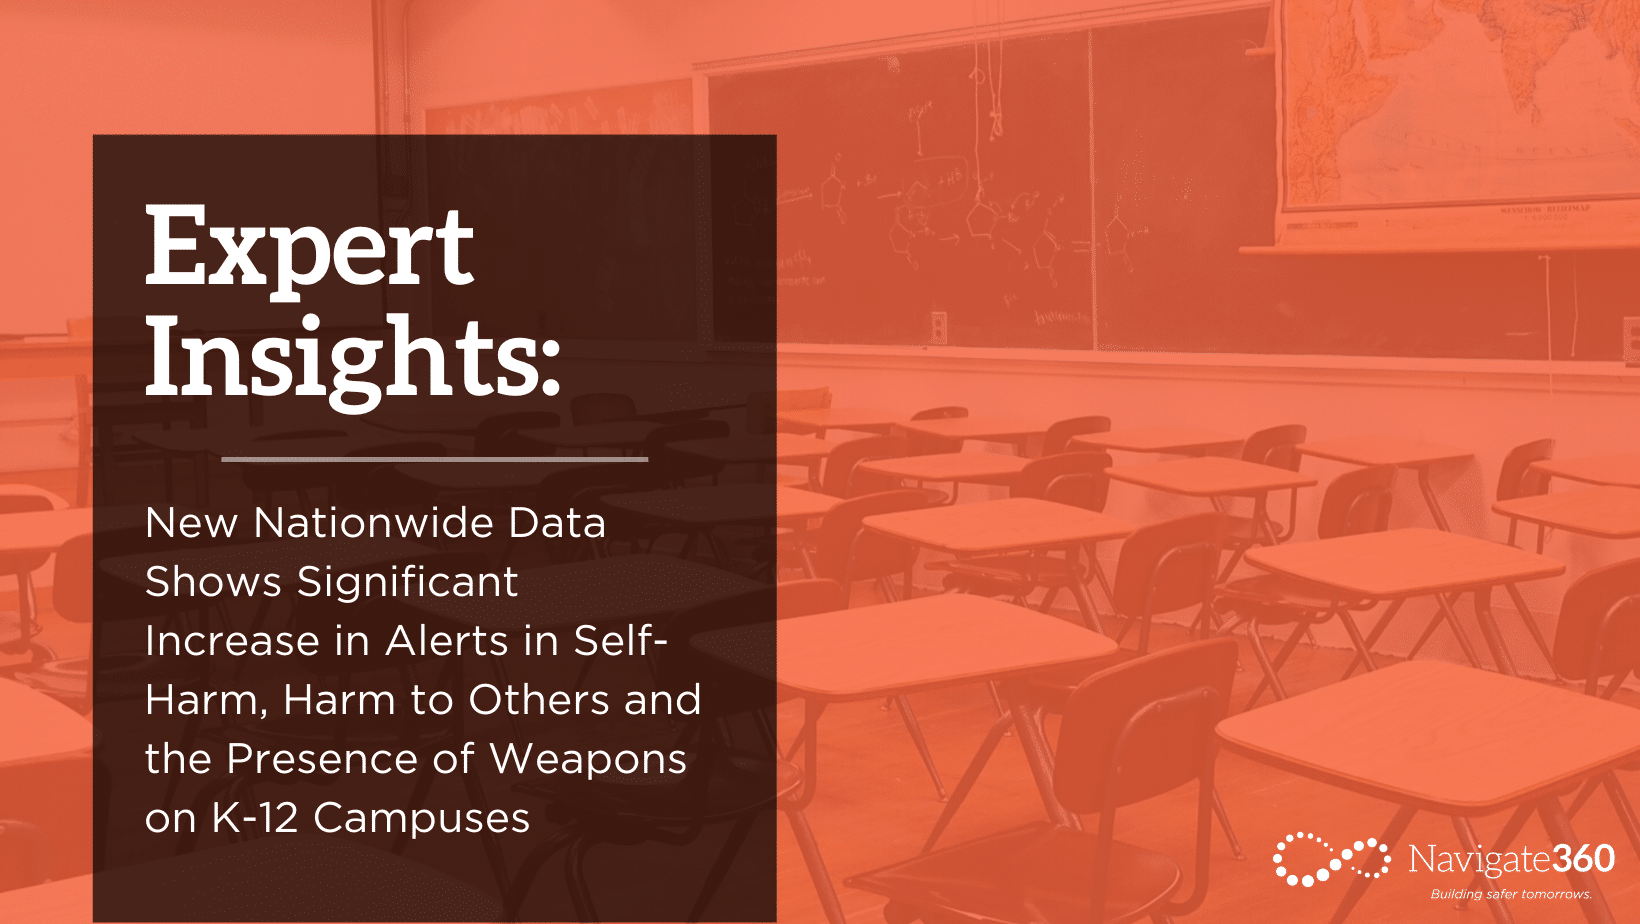 Expert Insights: New Nationwide Data Shows Significant Increase in Alerts in Self-Harm, Harm to Others and the Presence of Weapons on K-12 Campuses